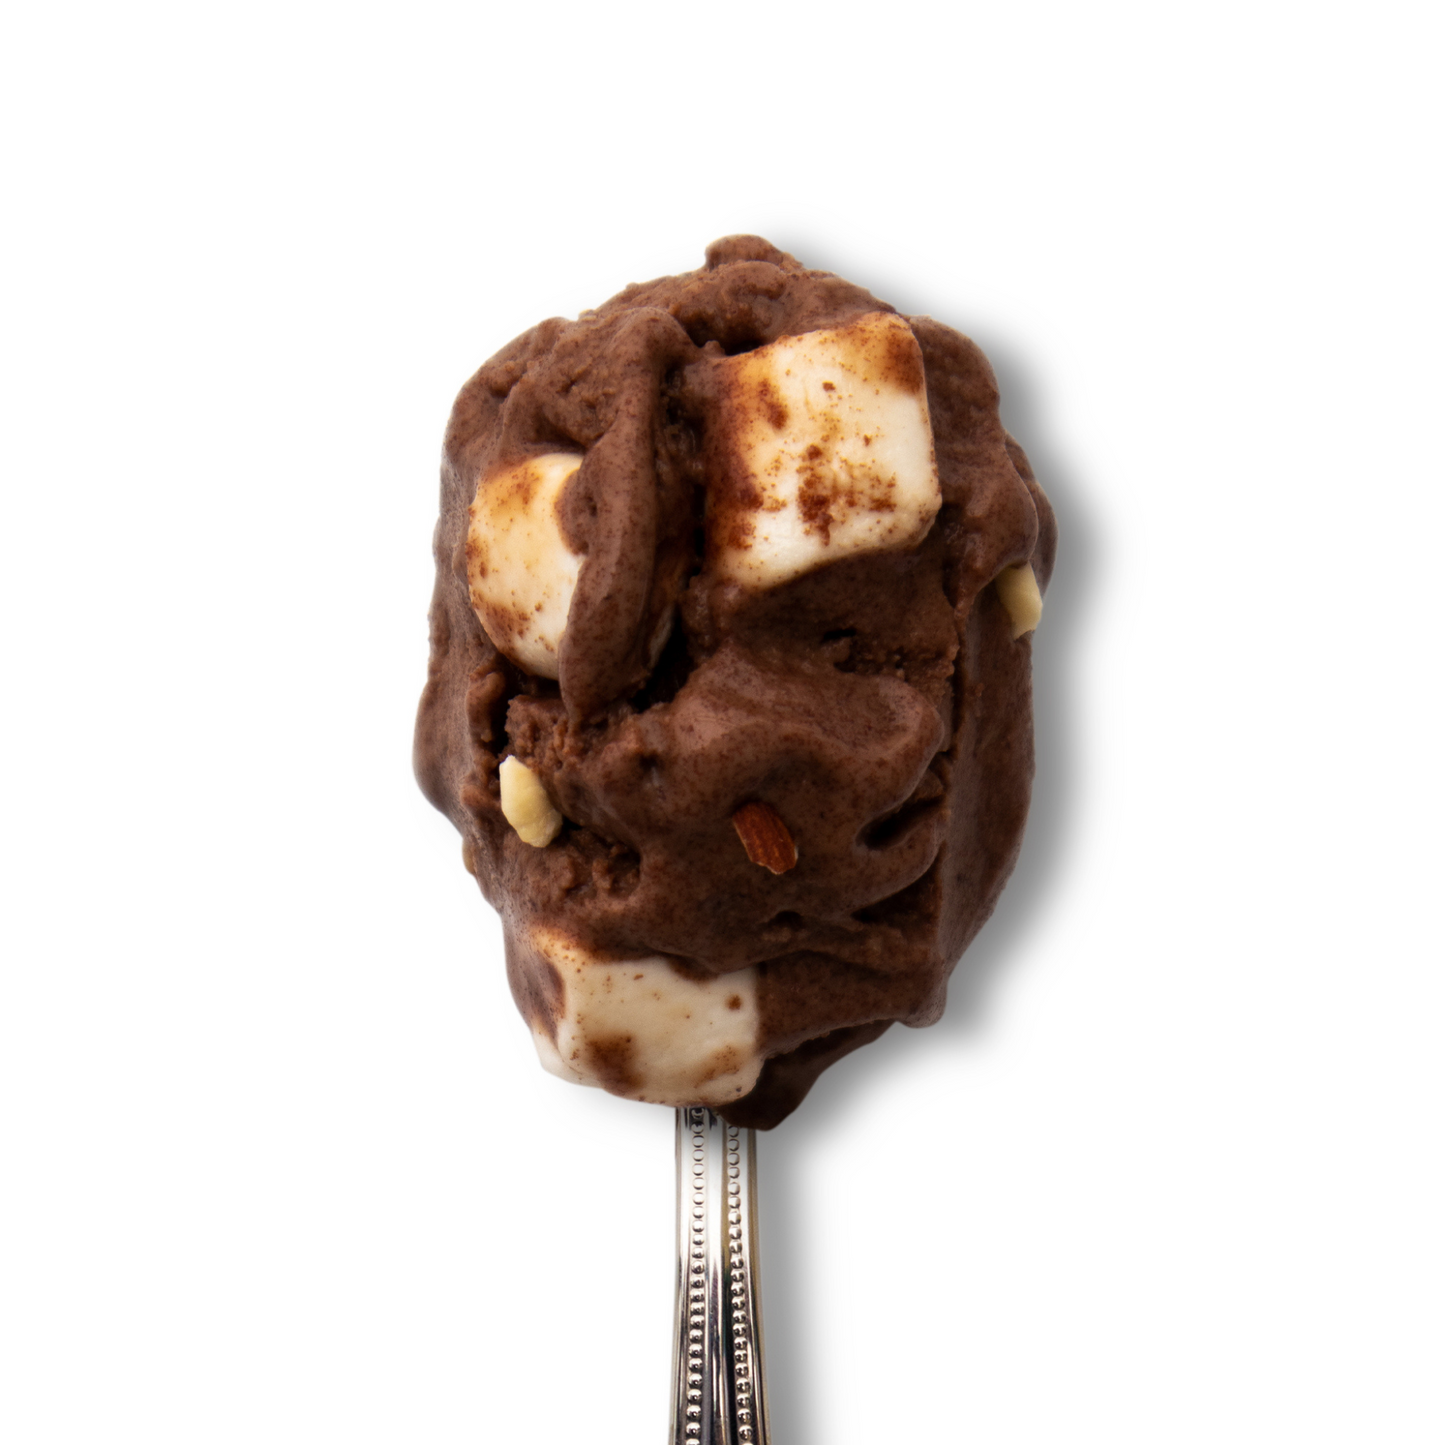 Rocky Road Non Dairy Ice Cream (6 containers 8oz each)